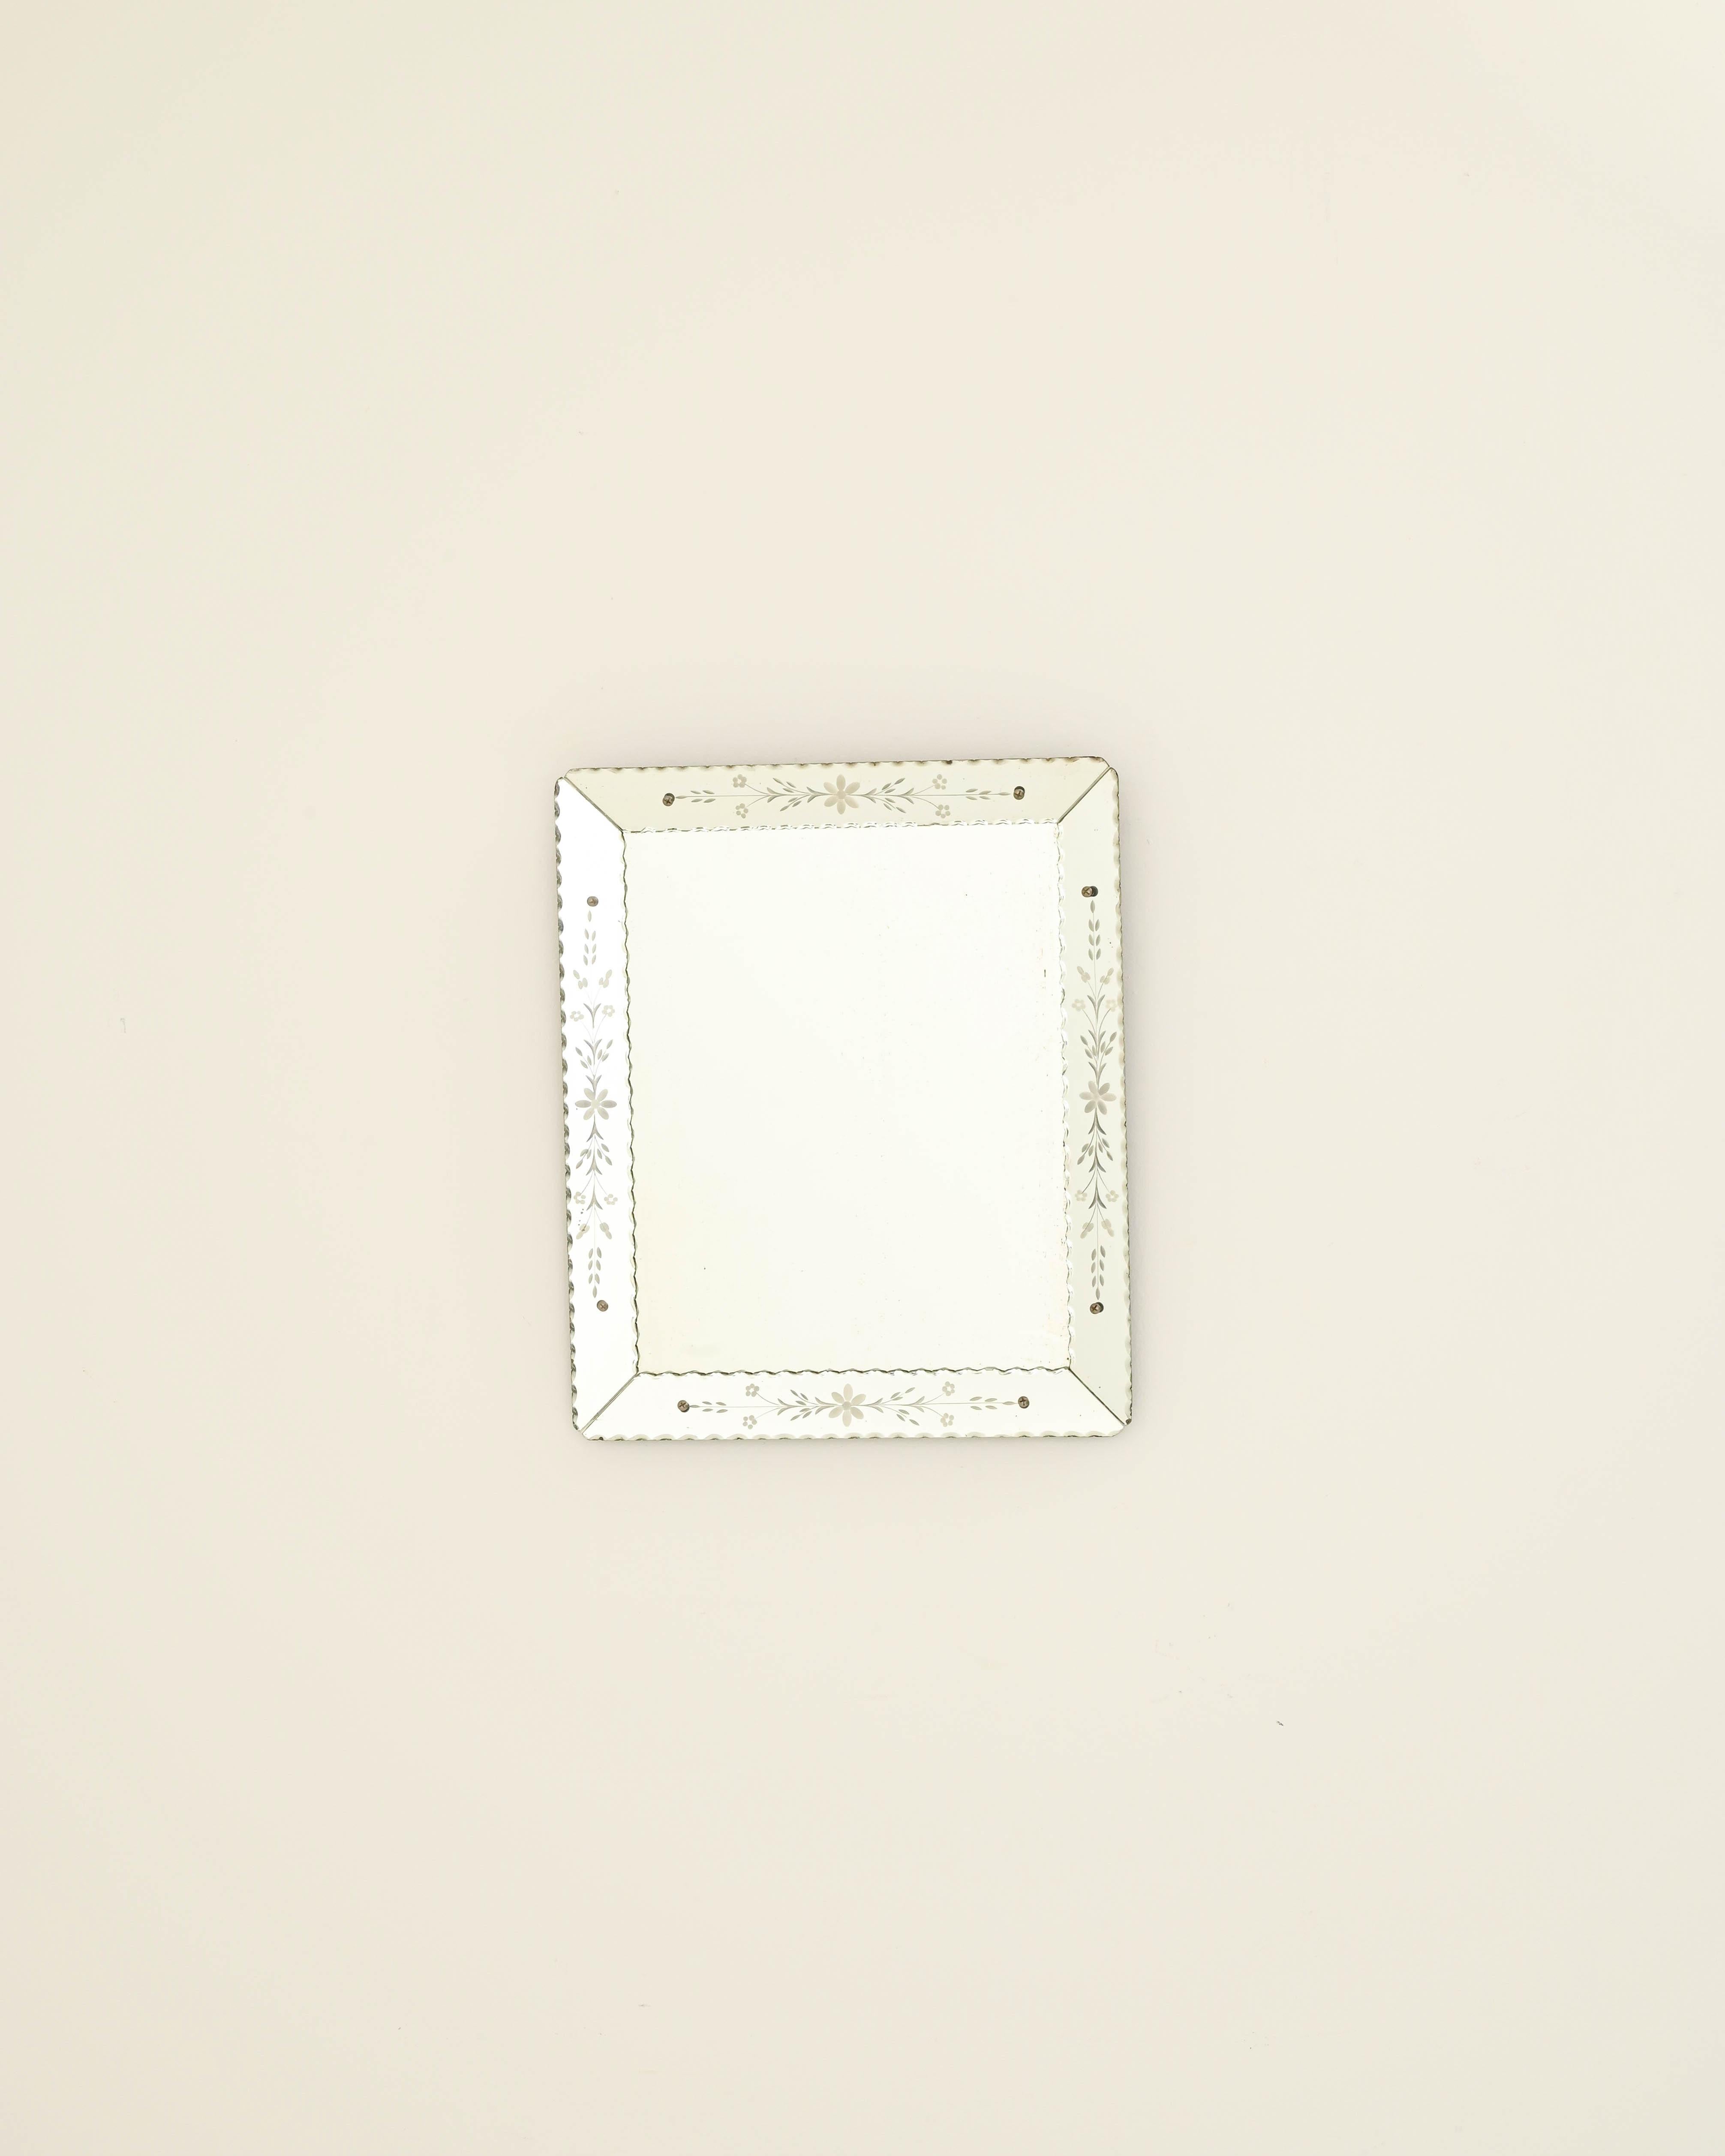 A keenly stylish design gives this vintage mirror a timeless glamor. Made in Italy in the 20th century, the bold minimalism and sleek unity of the composition showcase the sophistication of the ‘Bel Design’ movement. The rectangular mirror is